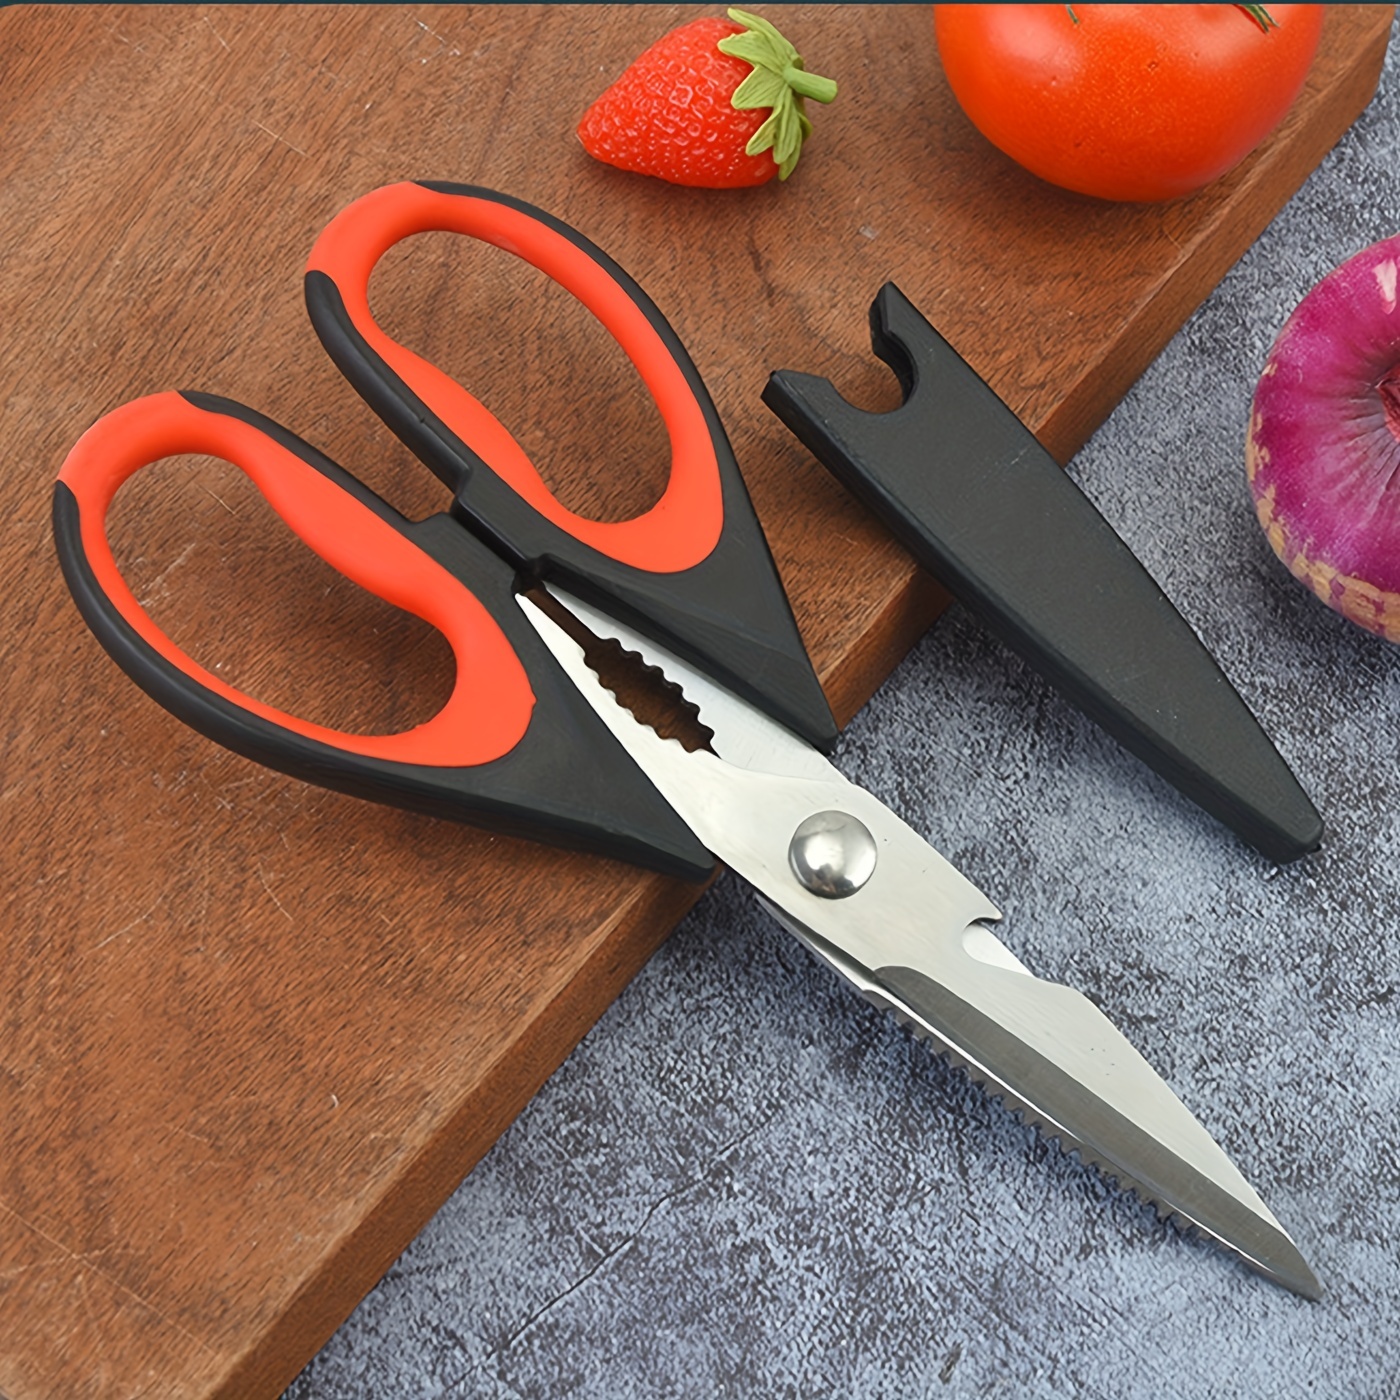 Heavy Duty Kitchen Scissors TANSUNG, Multifunction Kitchen Shears for Poultry, Fish, Herb, Flowers - Sharp Blade Shears - Detachable for Easy to Clea